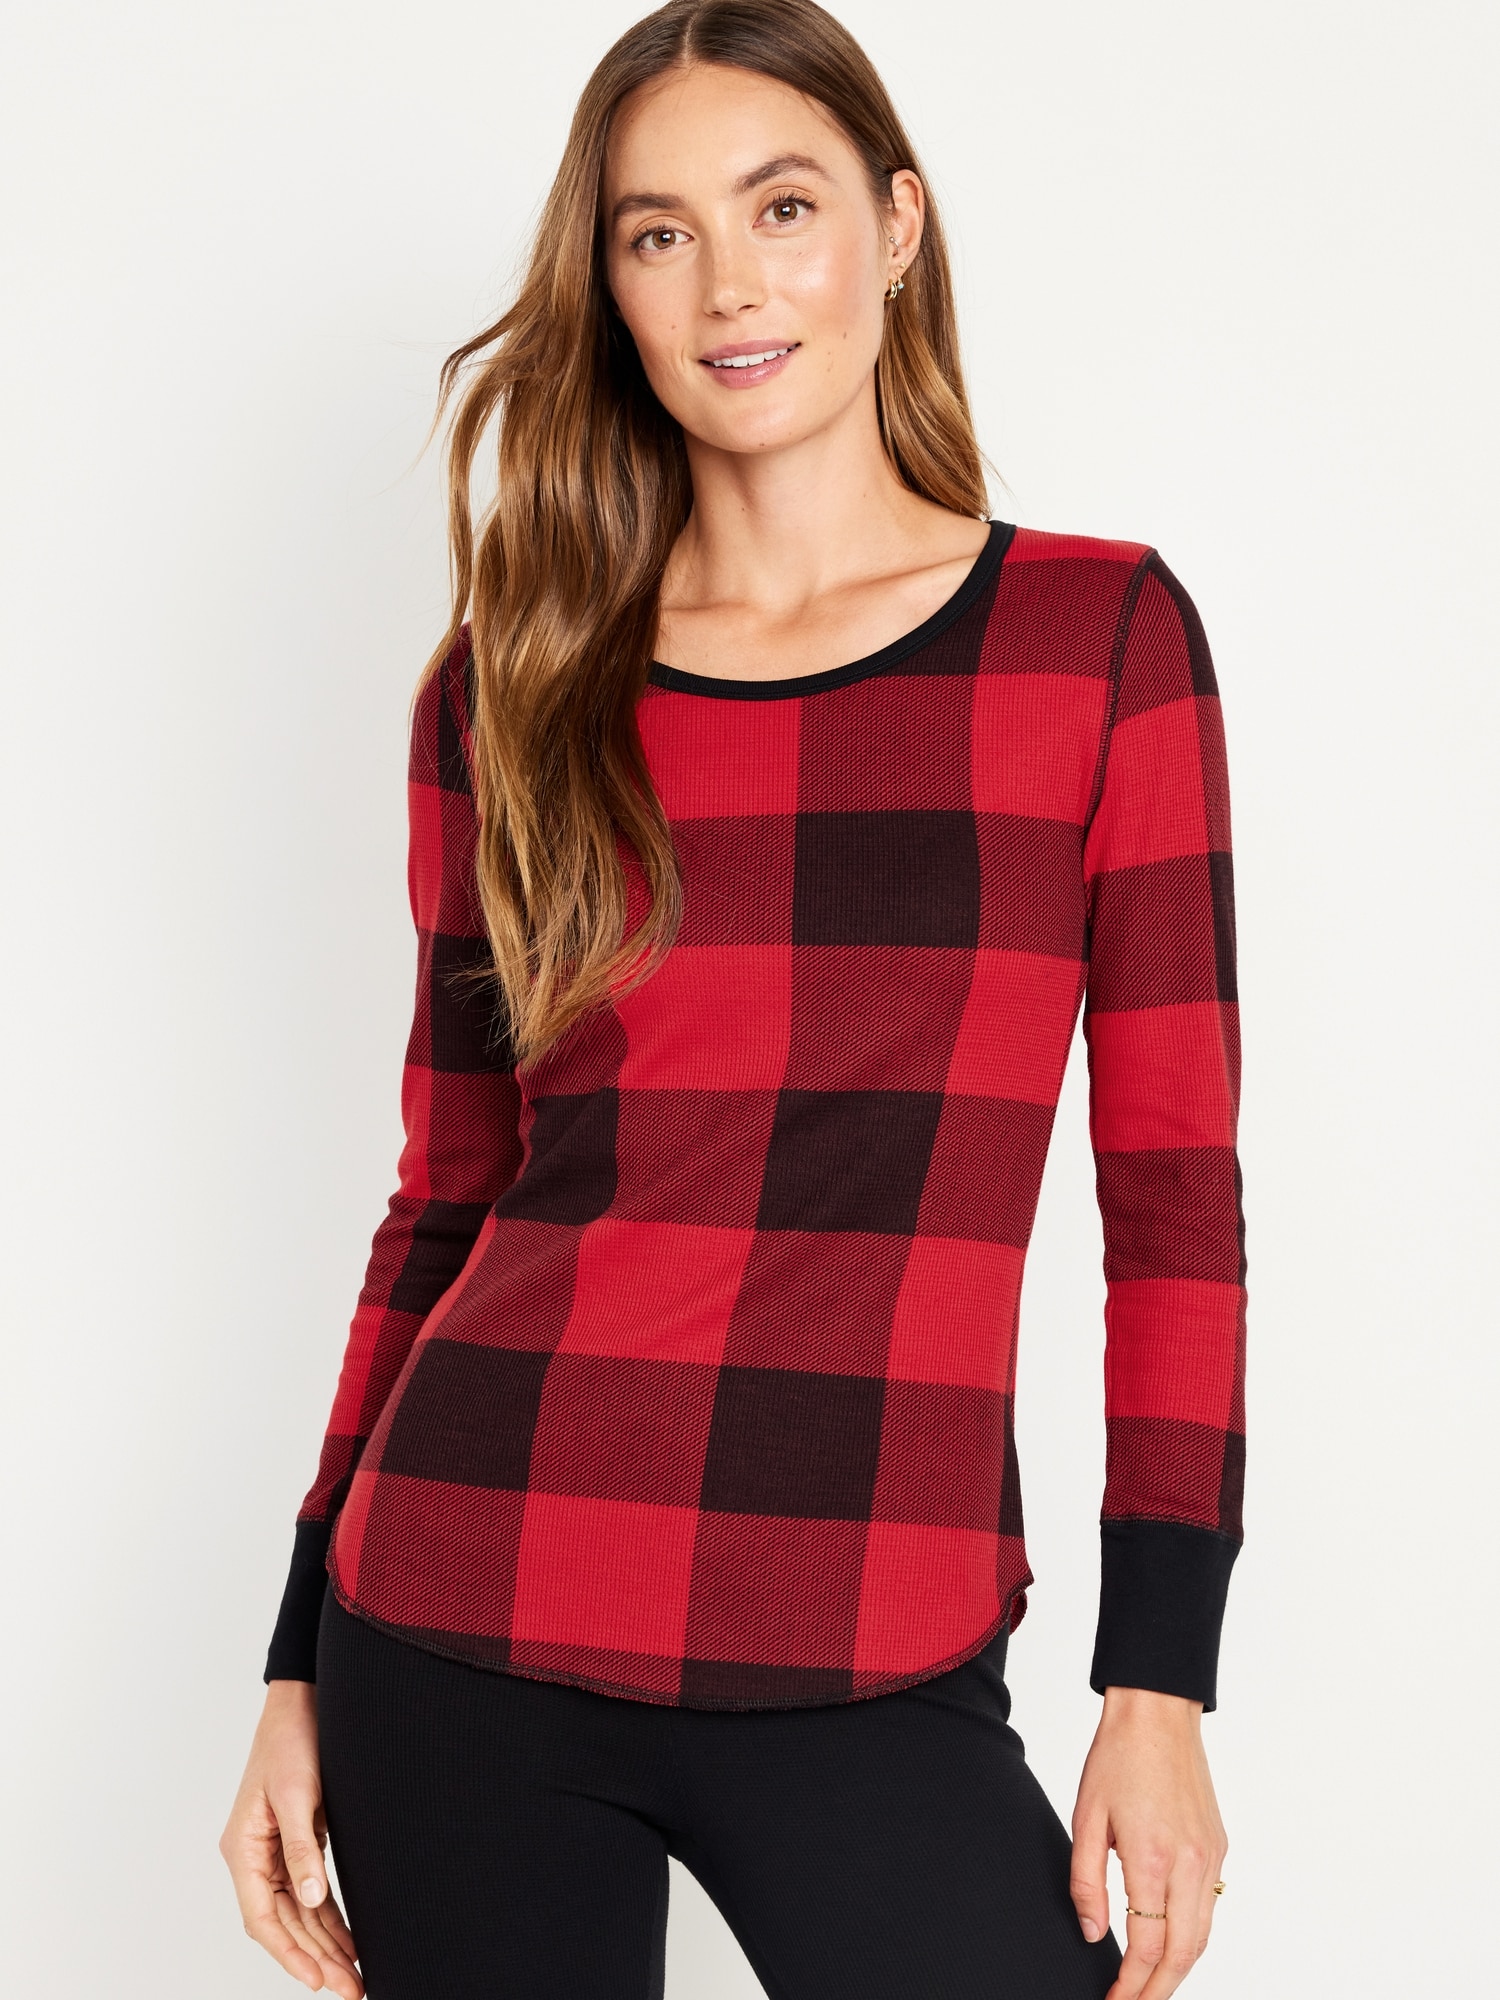 NWT Old Navy Red Buffalo Plaid Thermal Knit Tee Shirt Soft Waffle Women  Small